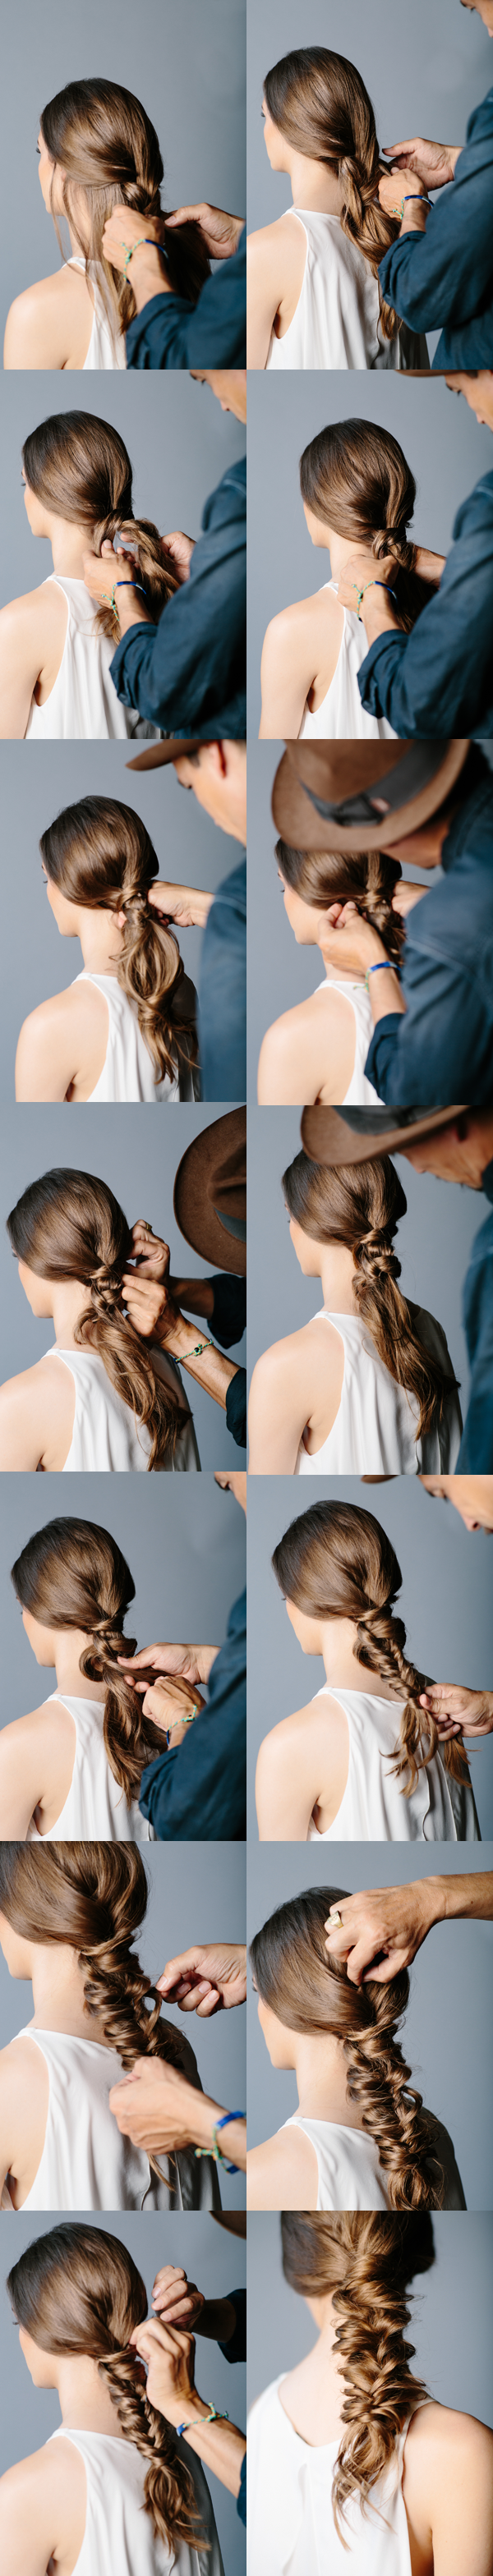 Beautiful tutorial for braided hairstyles